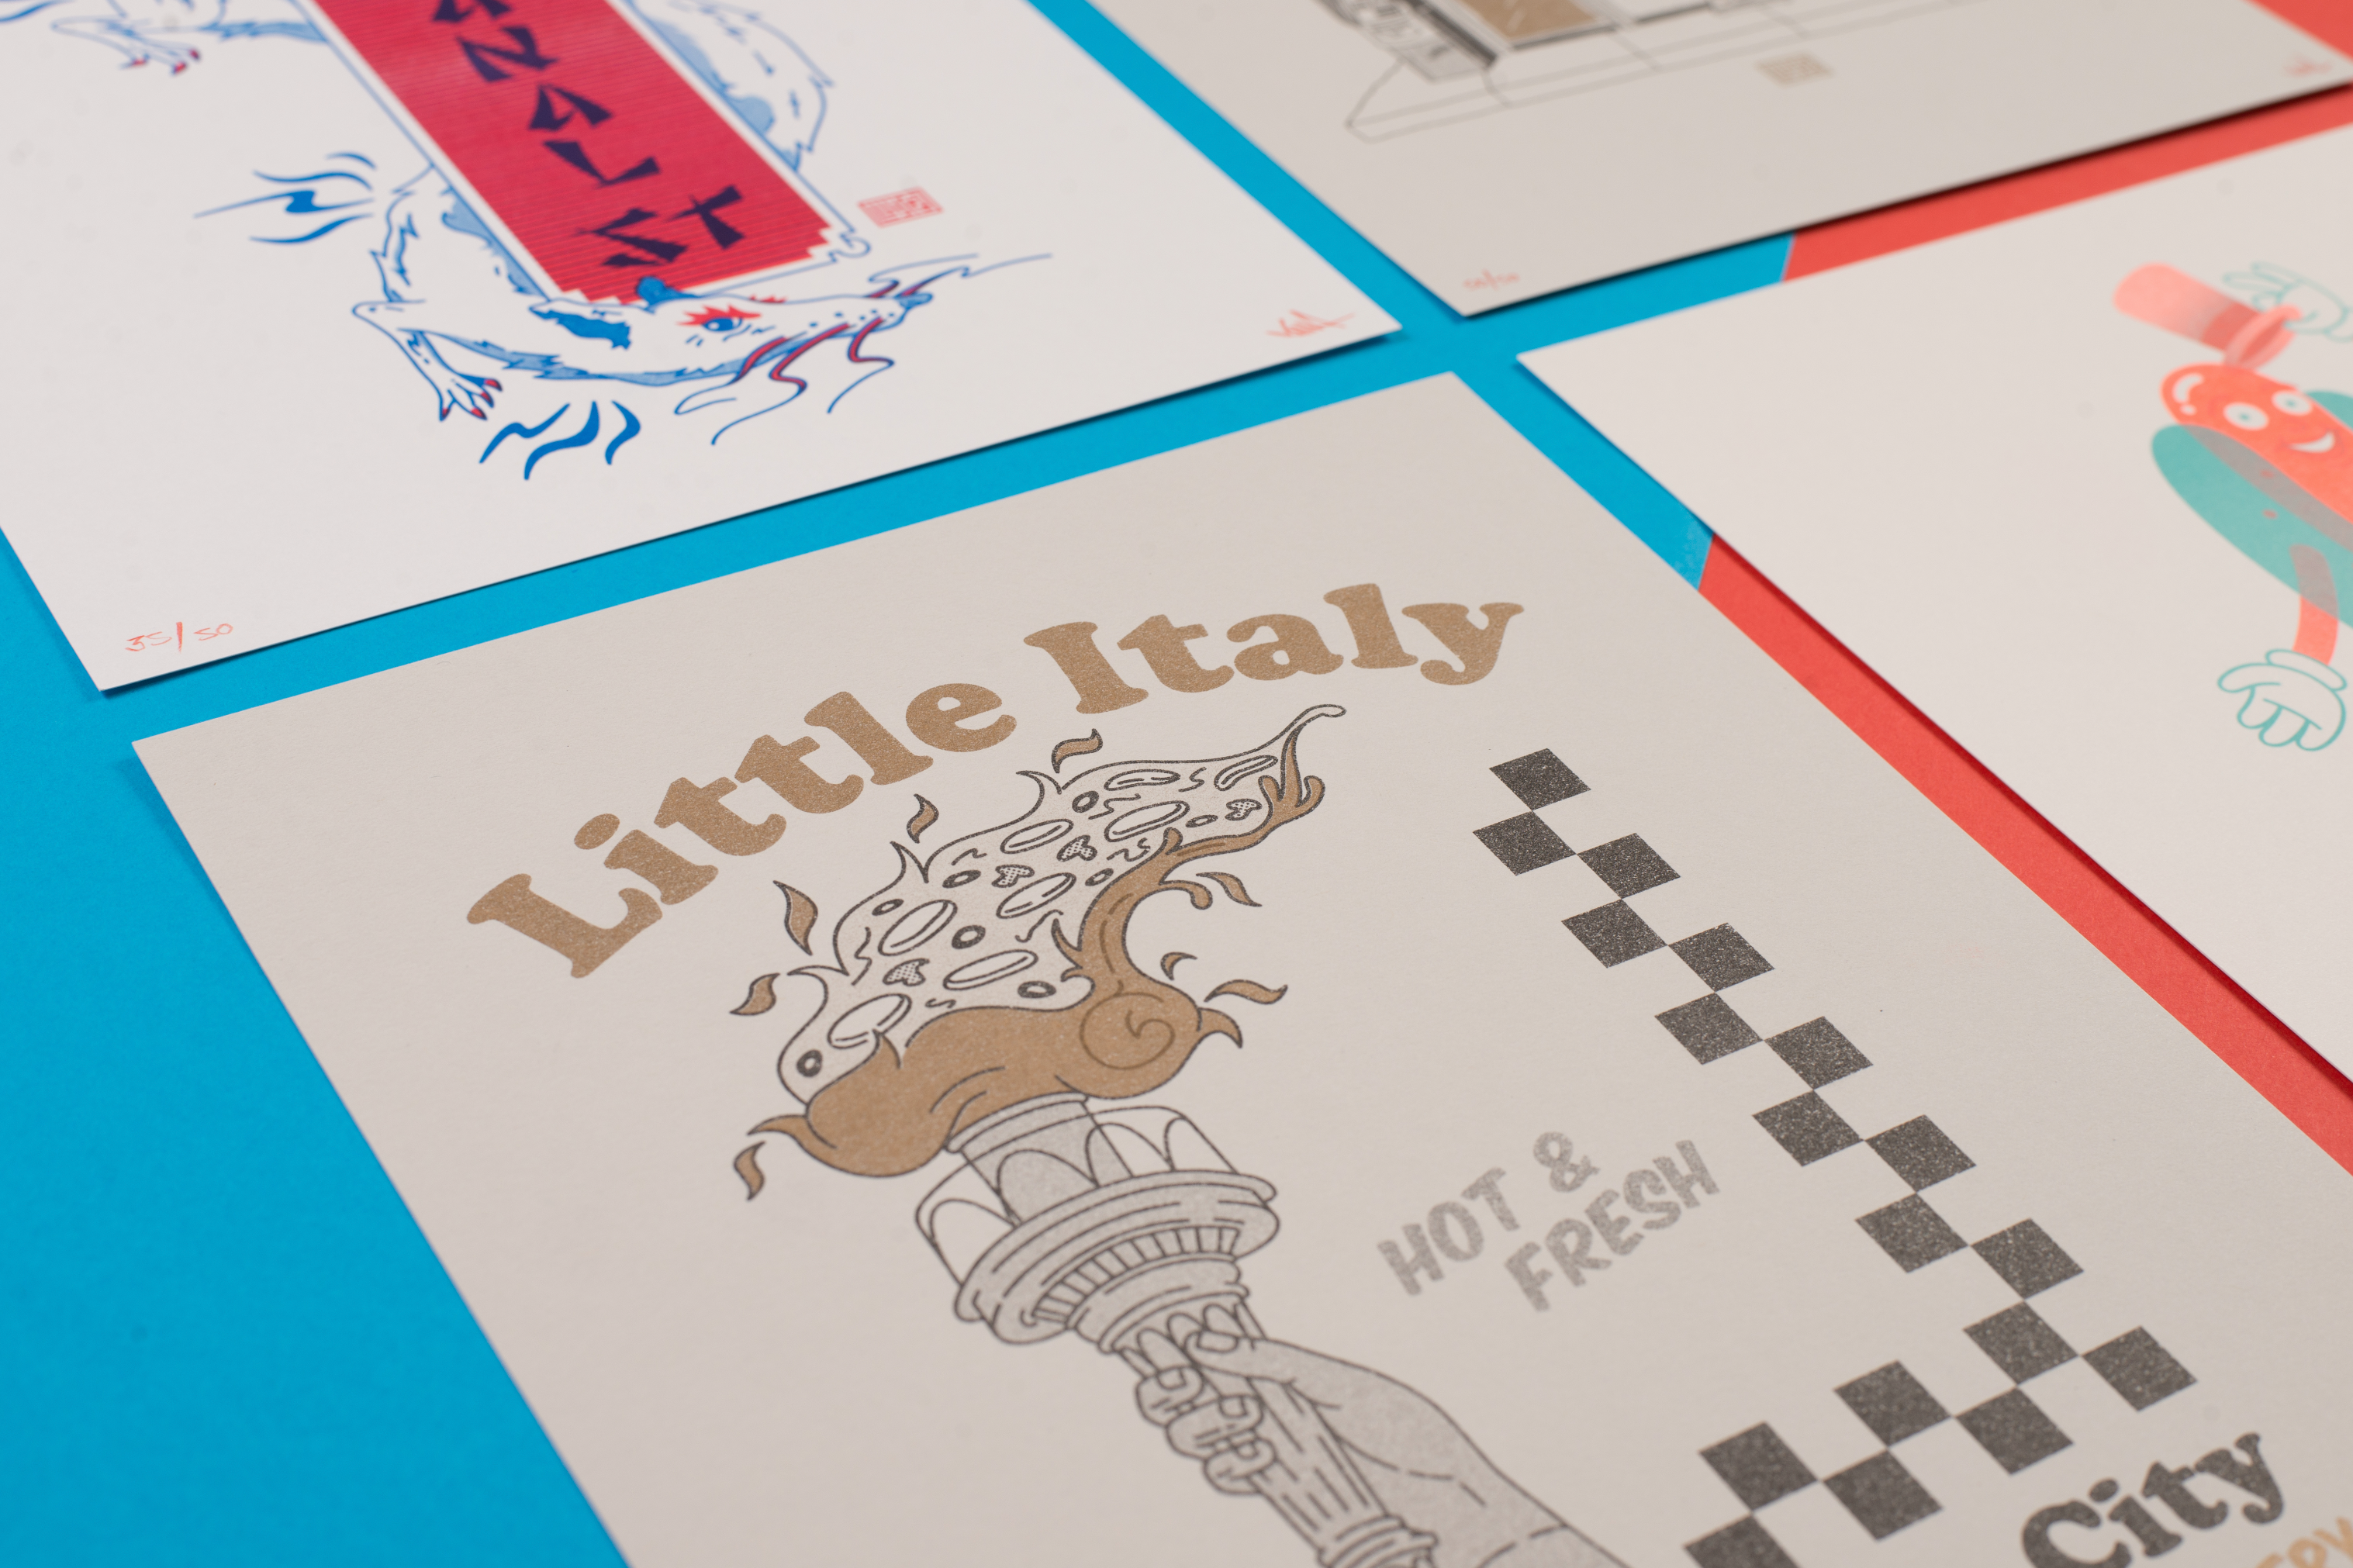 Little Italy Risograph Print by Lulab